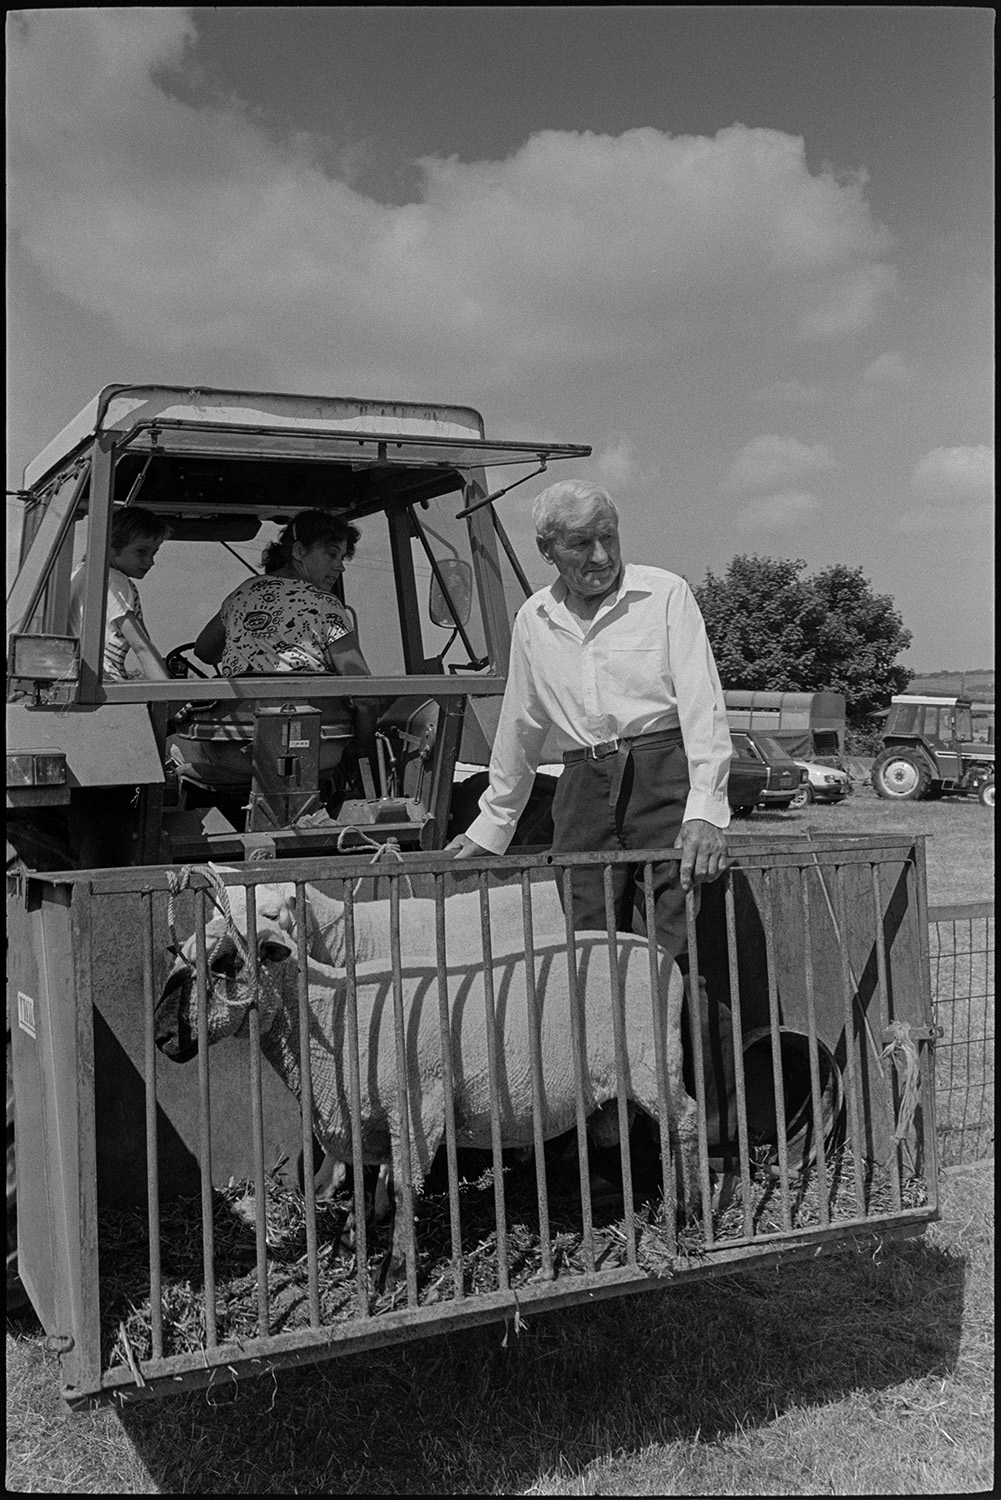 Country fair, vintage cars, sheep being rounded up for show.
[A man standing in a link box with two sheep at Ashreigney Country Fair. There is a boy and woman in the tractor cab. Other parked vehicles are visible in the field in the background.]